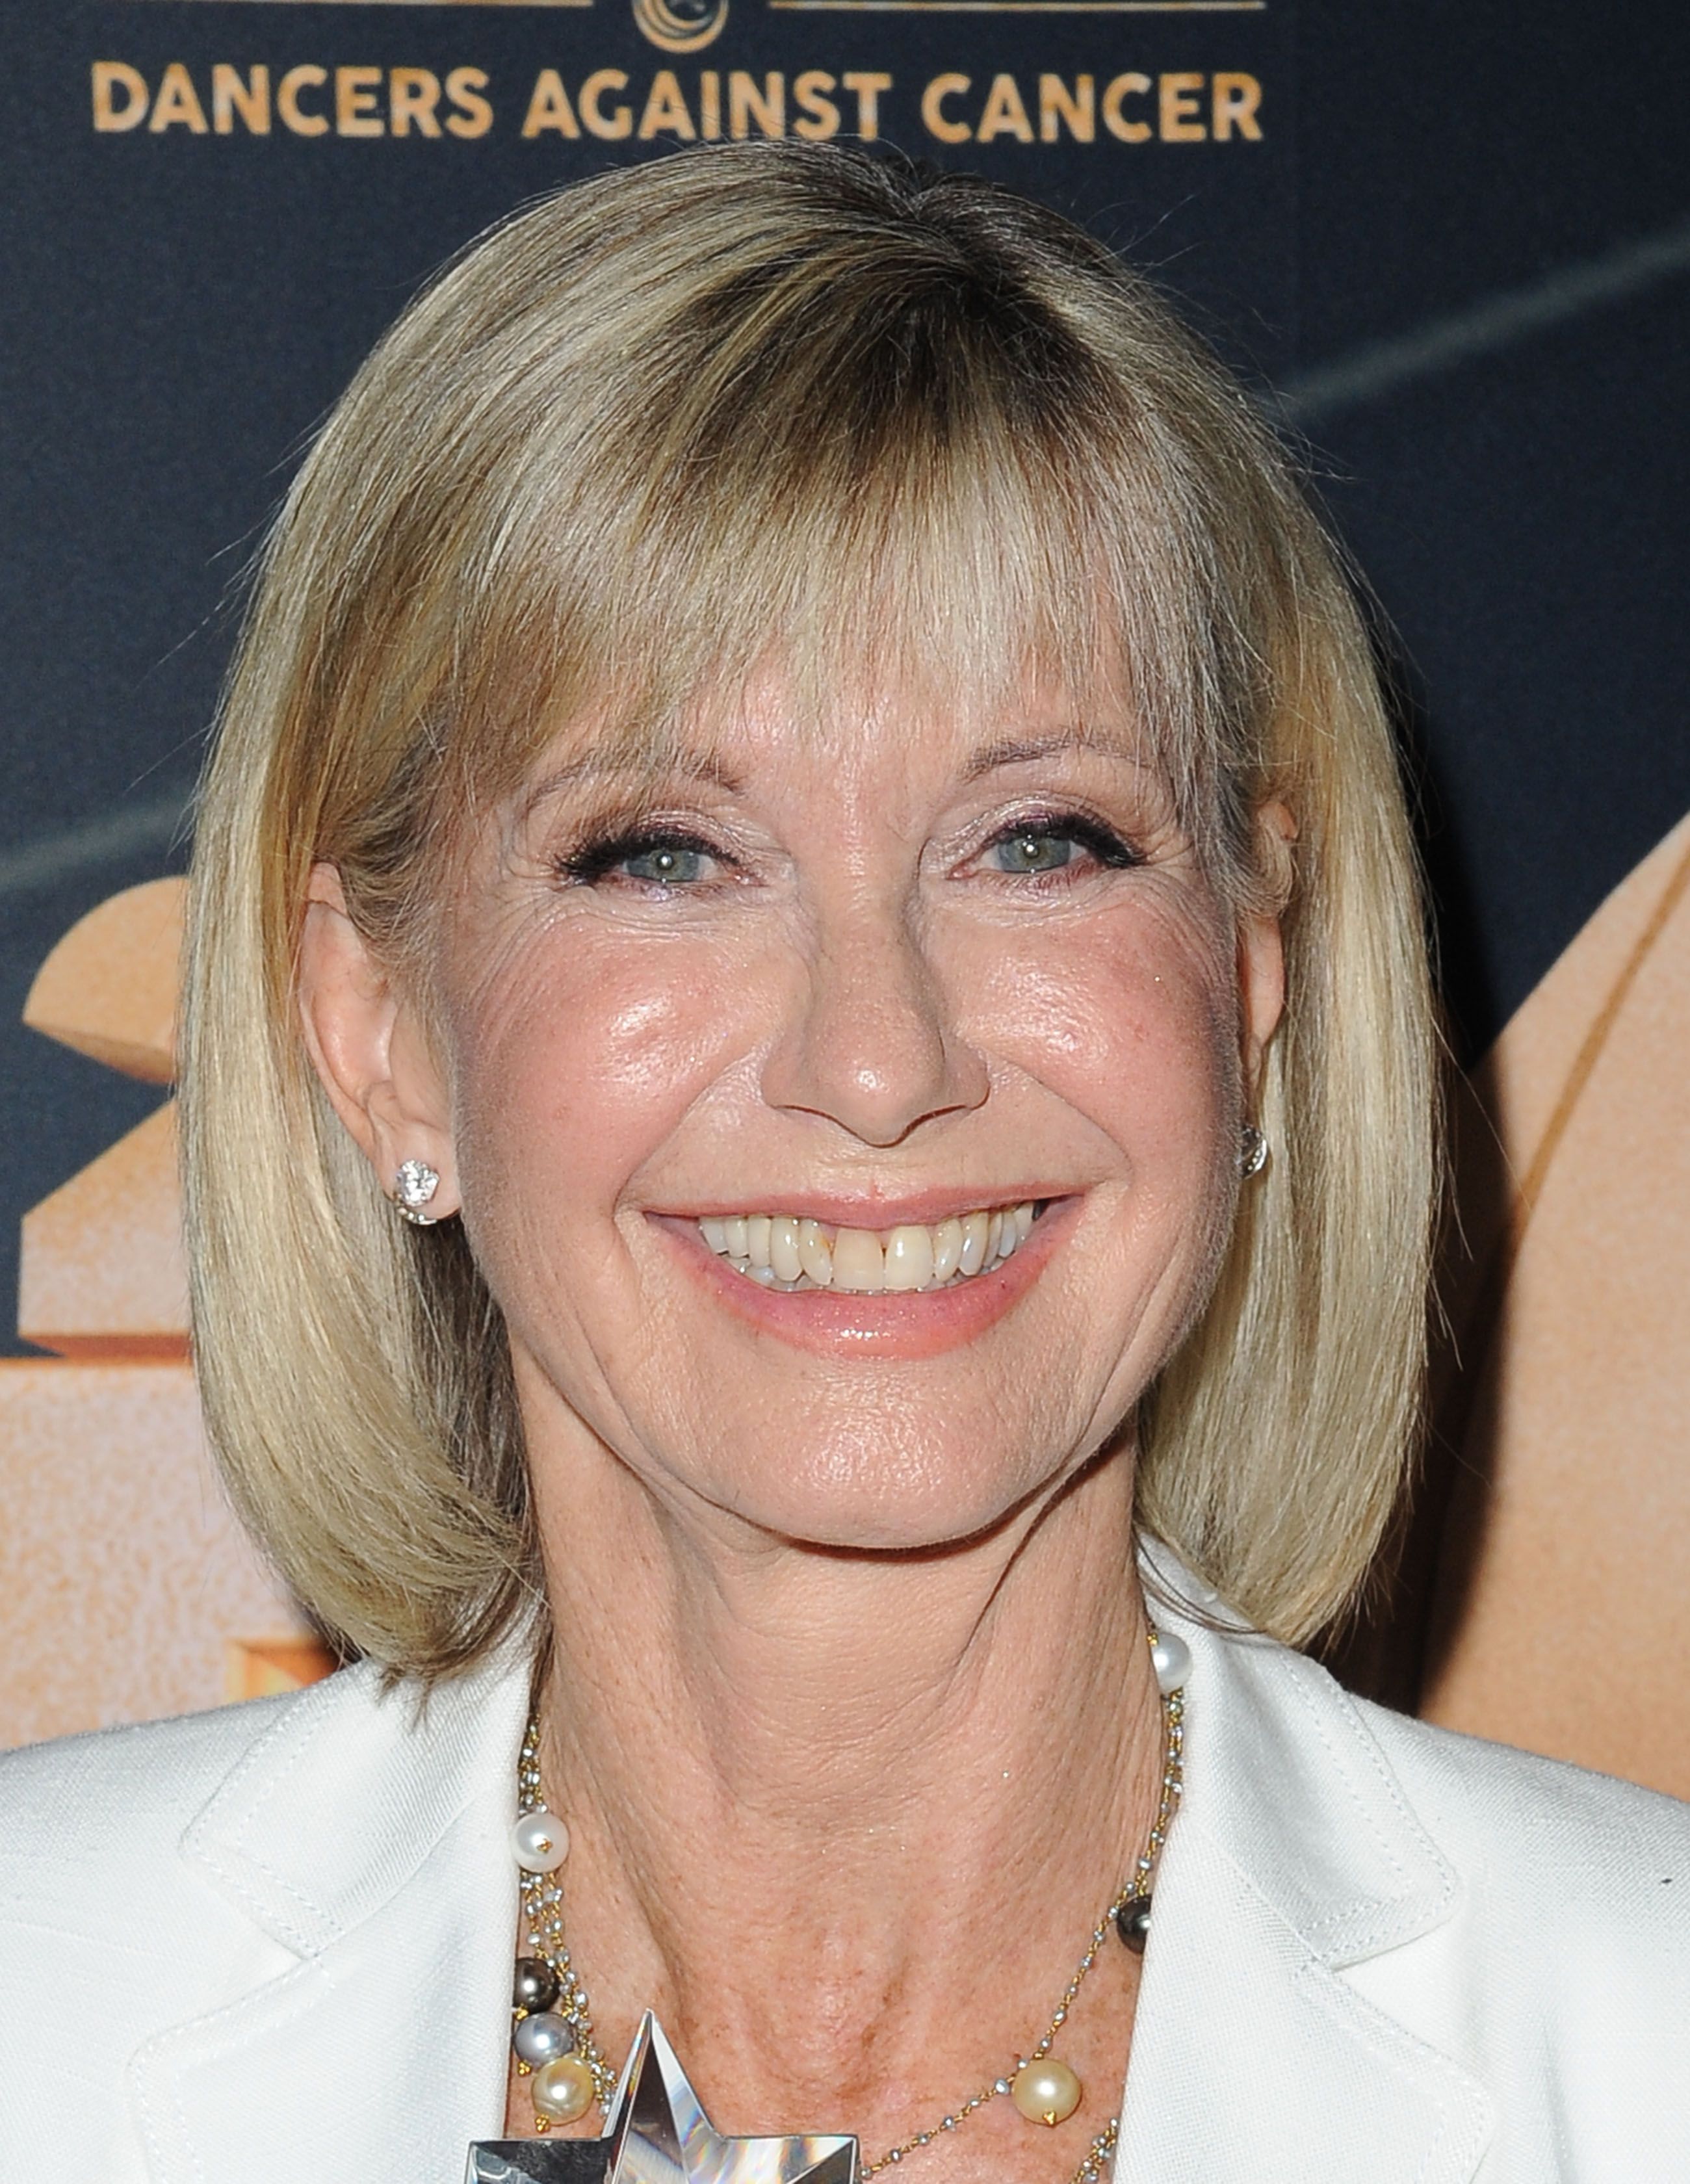 Olivia Newton-John at the Dance Industry Awards And Cancer Benefit Show 2019